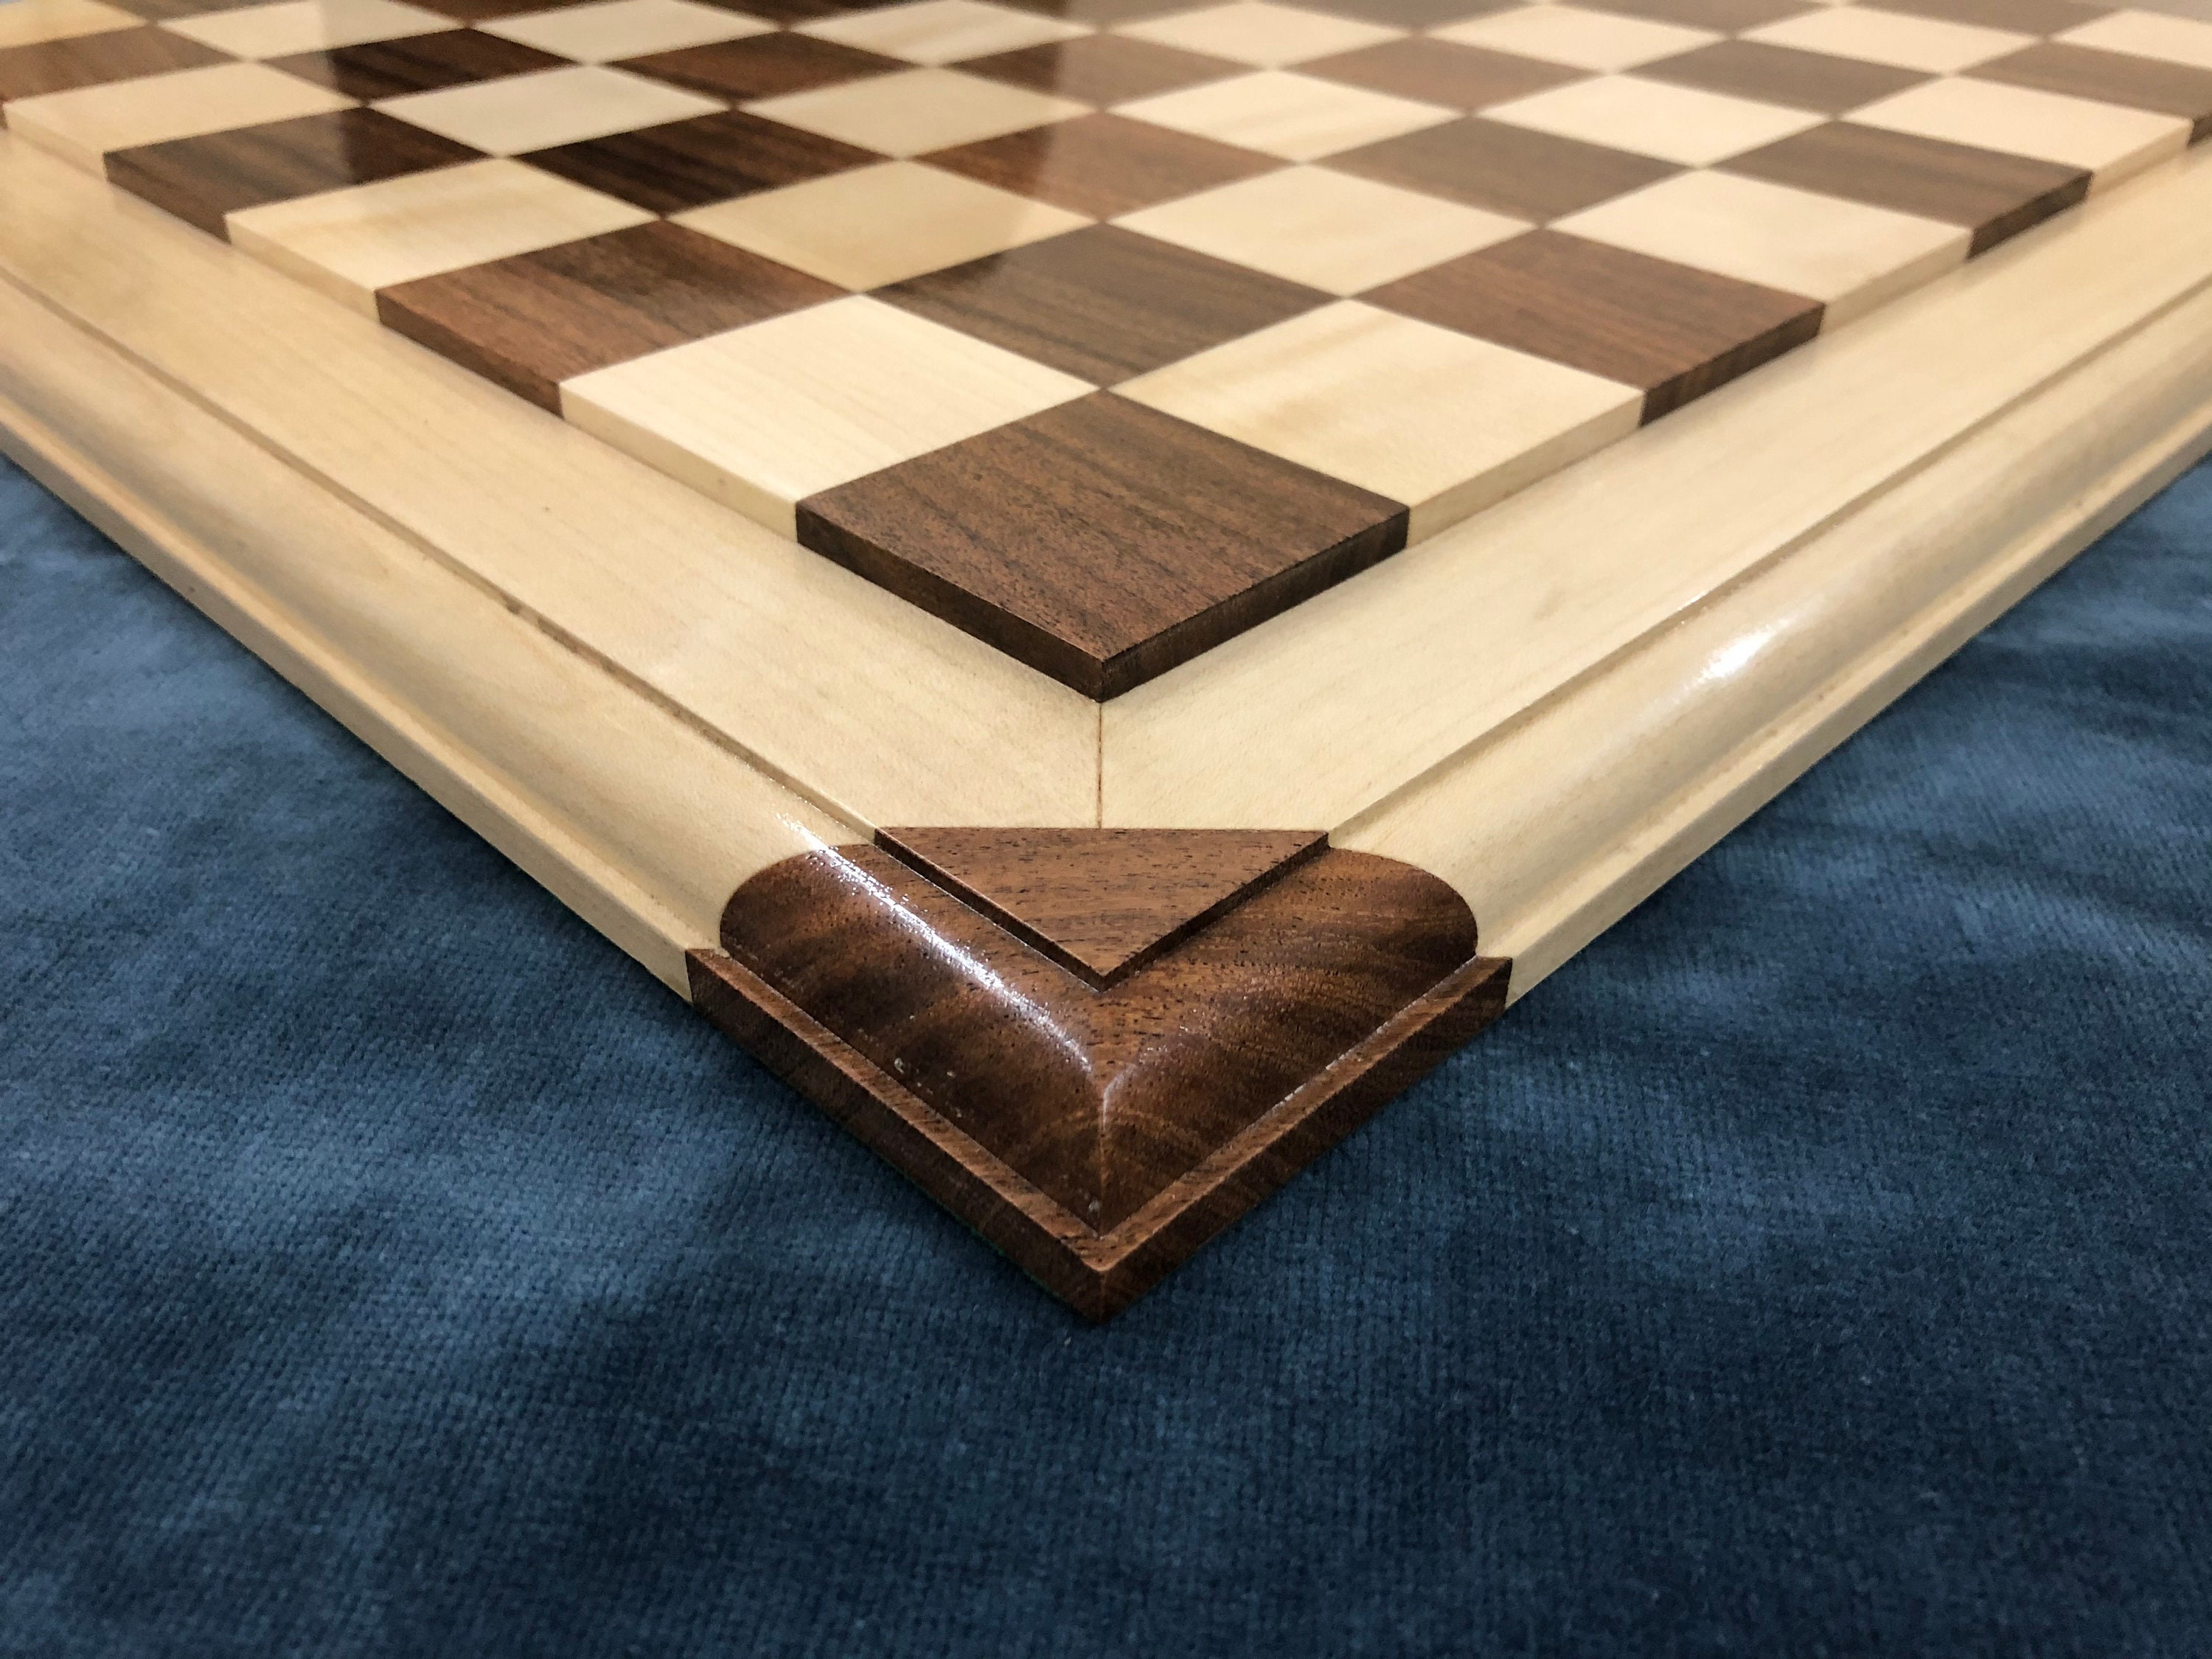 21 Chess Board Bud Rose wood & Maple - STEP BLACK BORDER Hand Carved SQ:  55MM